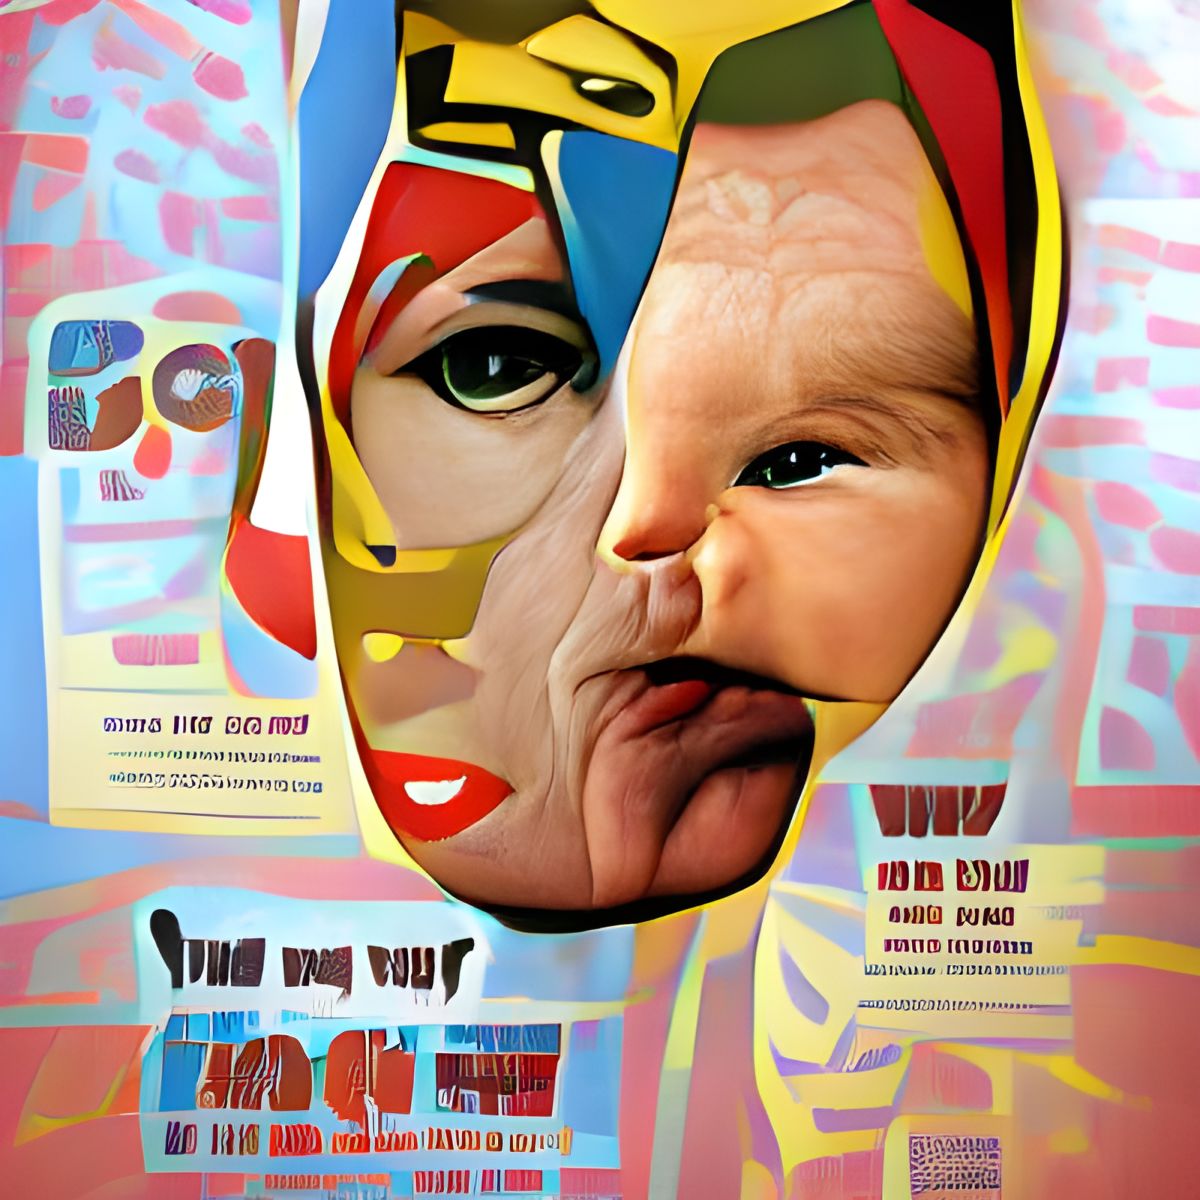 What Was Your Original Face Before You Were Born?